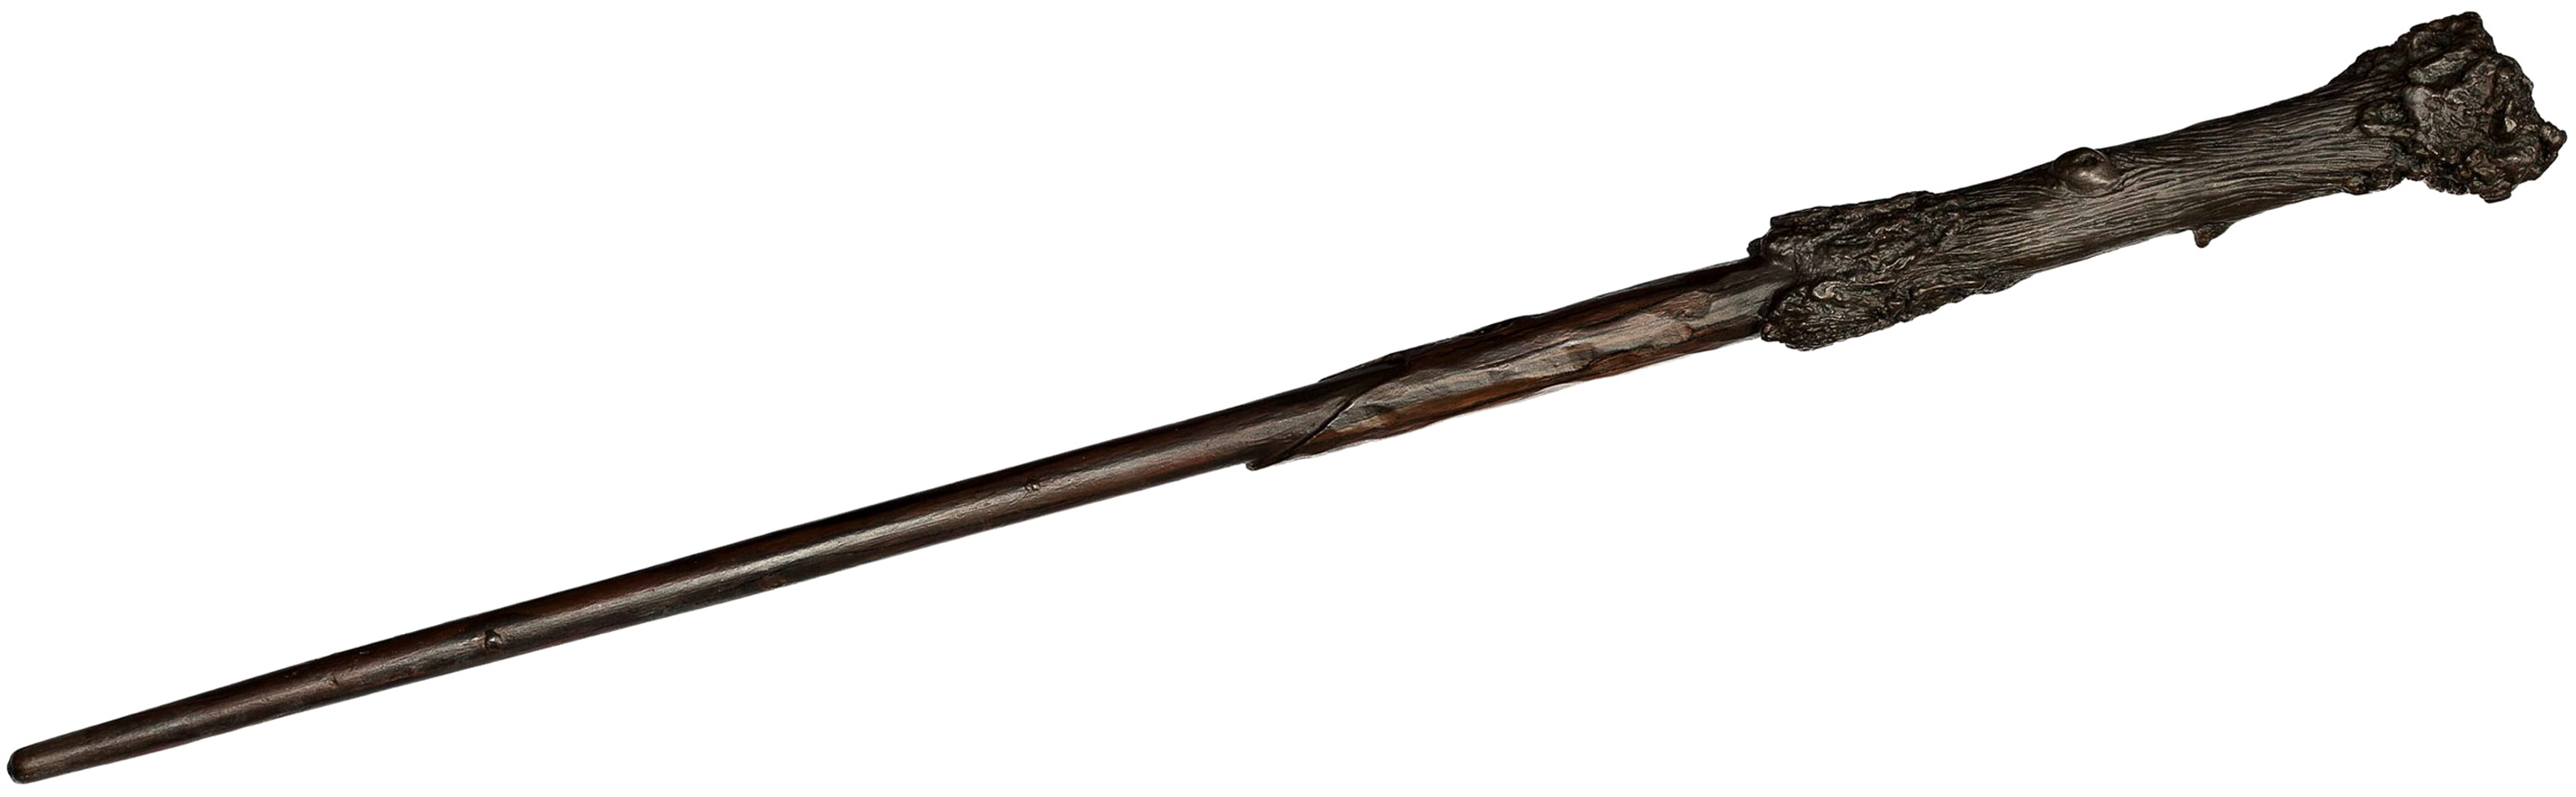 Wand Png 2861 X 885